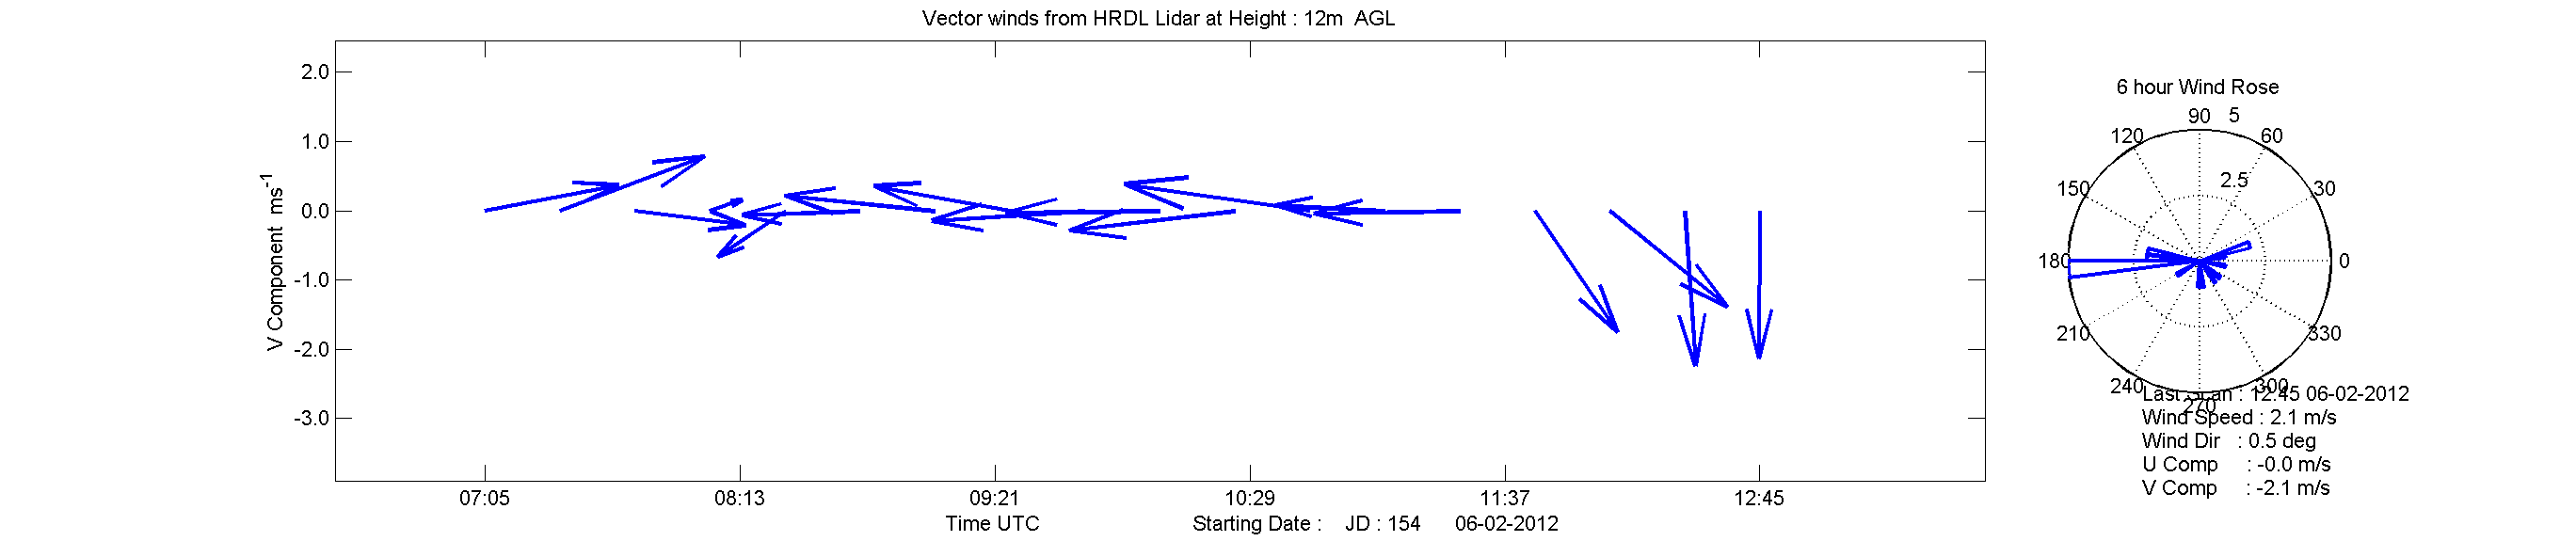 HRDL surface vector winds